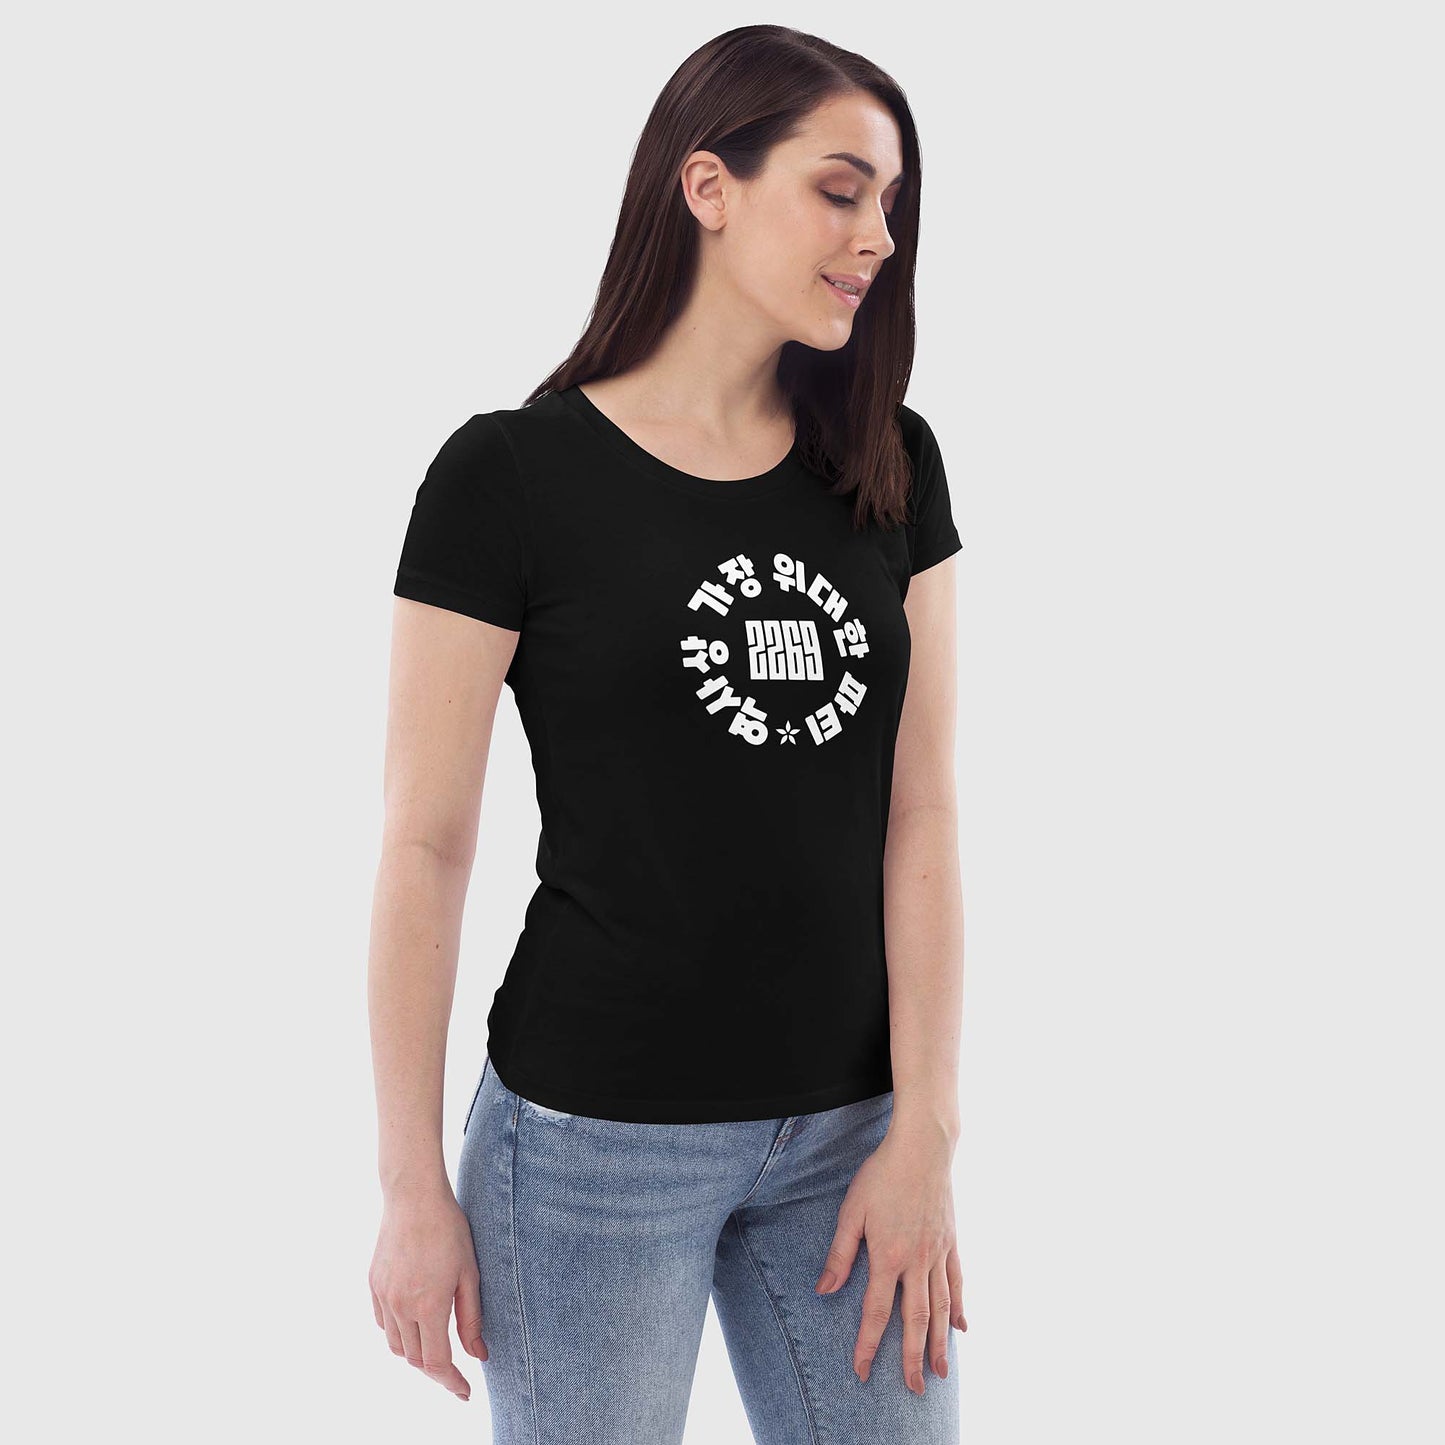 Women's black fitted organic cotton t-shirt with Korean 2269 party circle